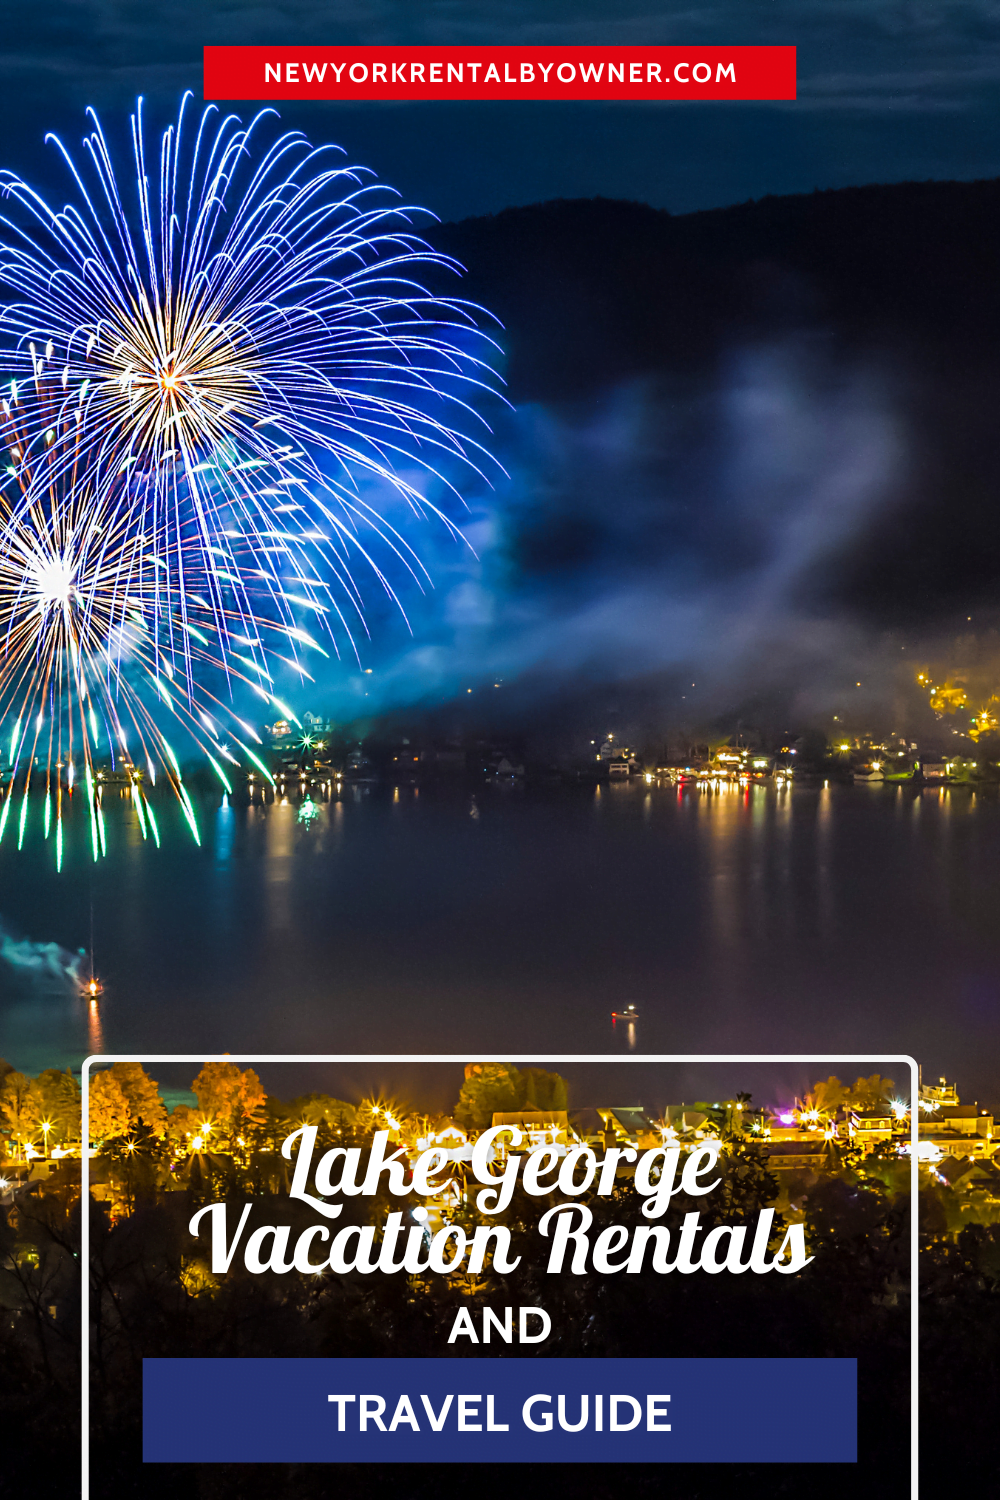 Lake george Vacation Rentals and Travel Guide